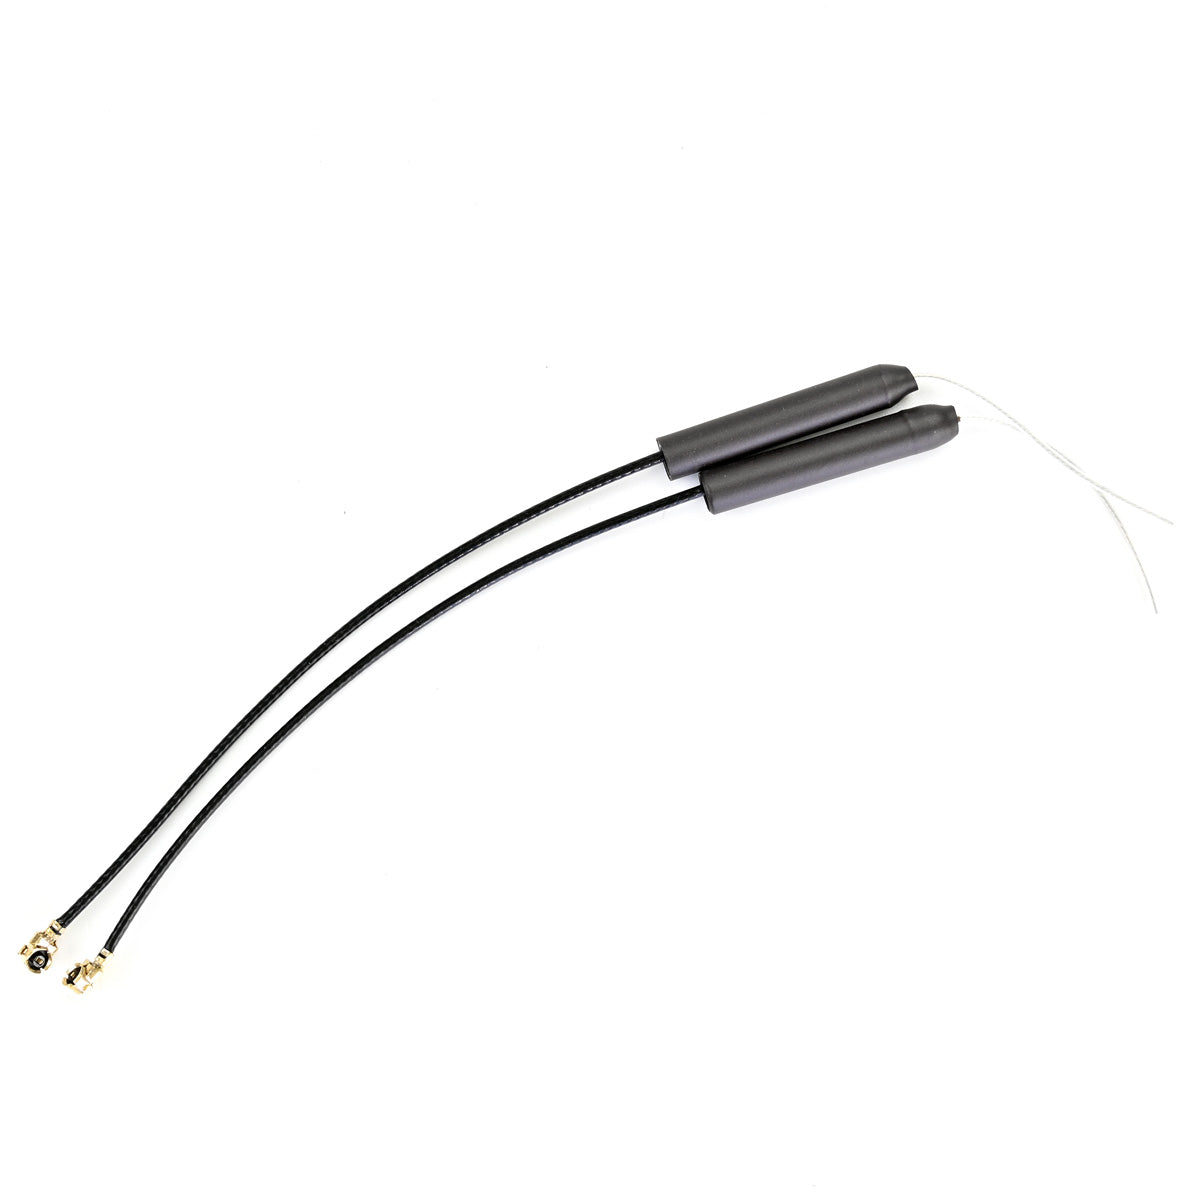 TBS Tracer Sleeve Dipole RX Antenna | Drone Parts Garage